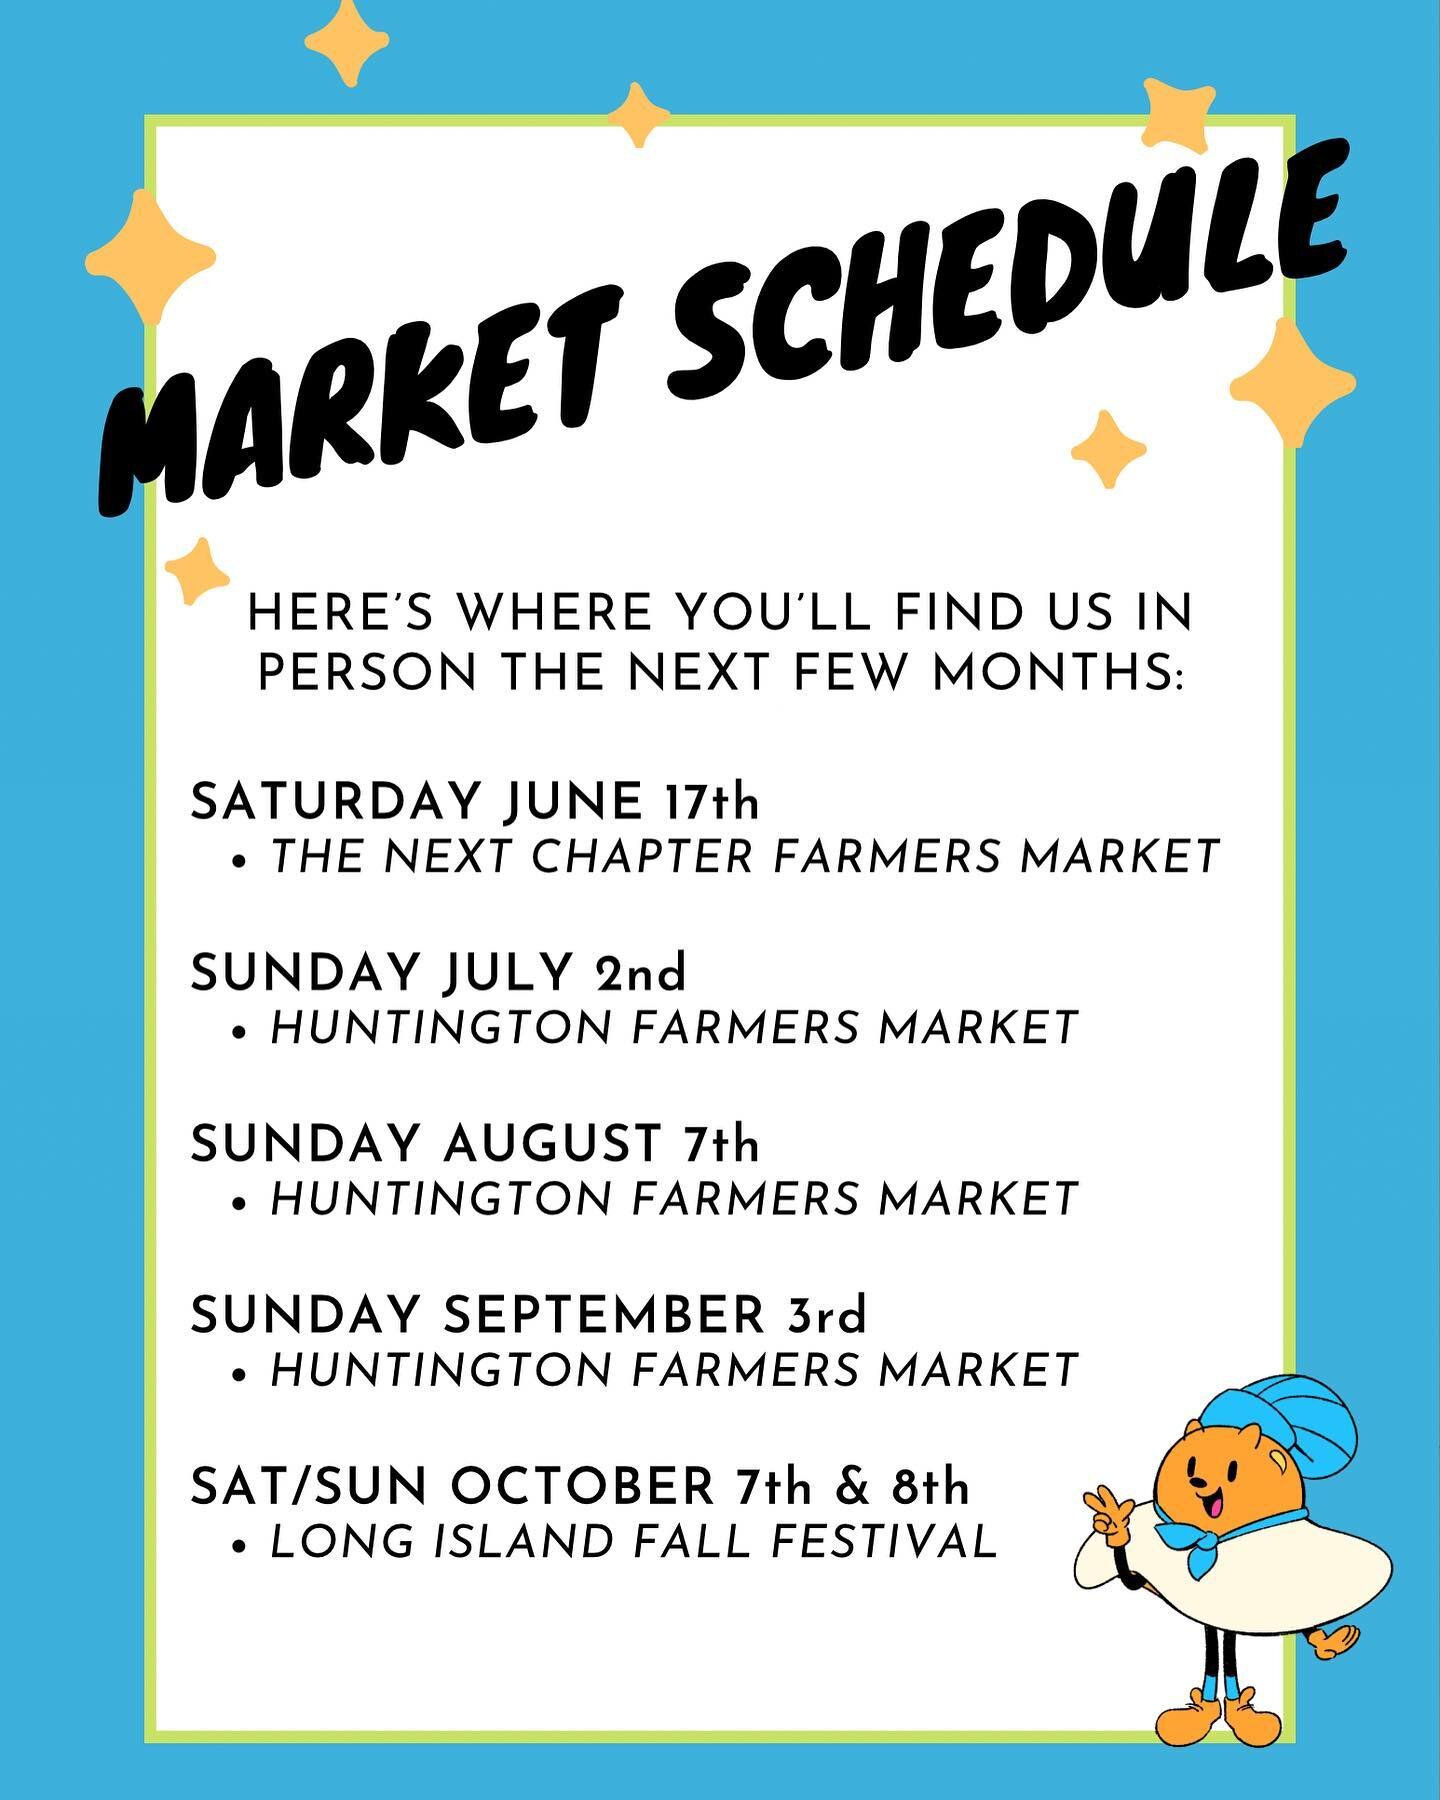 Happy Sunday friends 🌞 This is our current list of in person events for the next few months, and we&rsquo;re so excited to share with you all! Come and hang out with us and have some goodies, this summer&rsquo;s gonna be a blast! ☺️🍪🌻🧁

#everythi